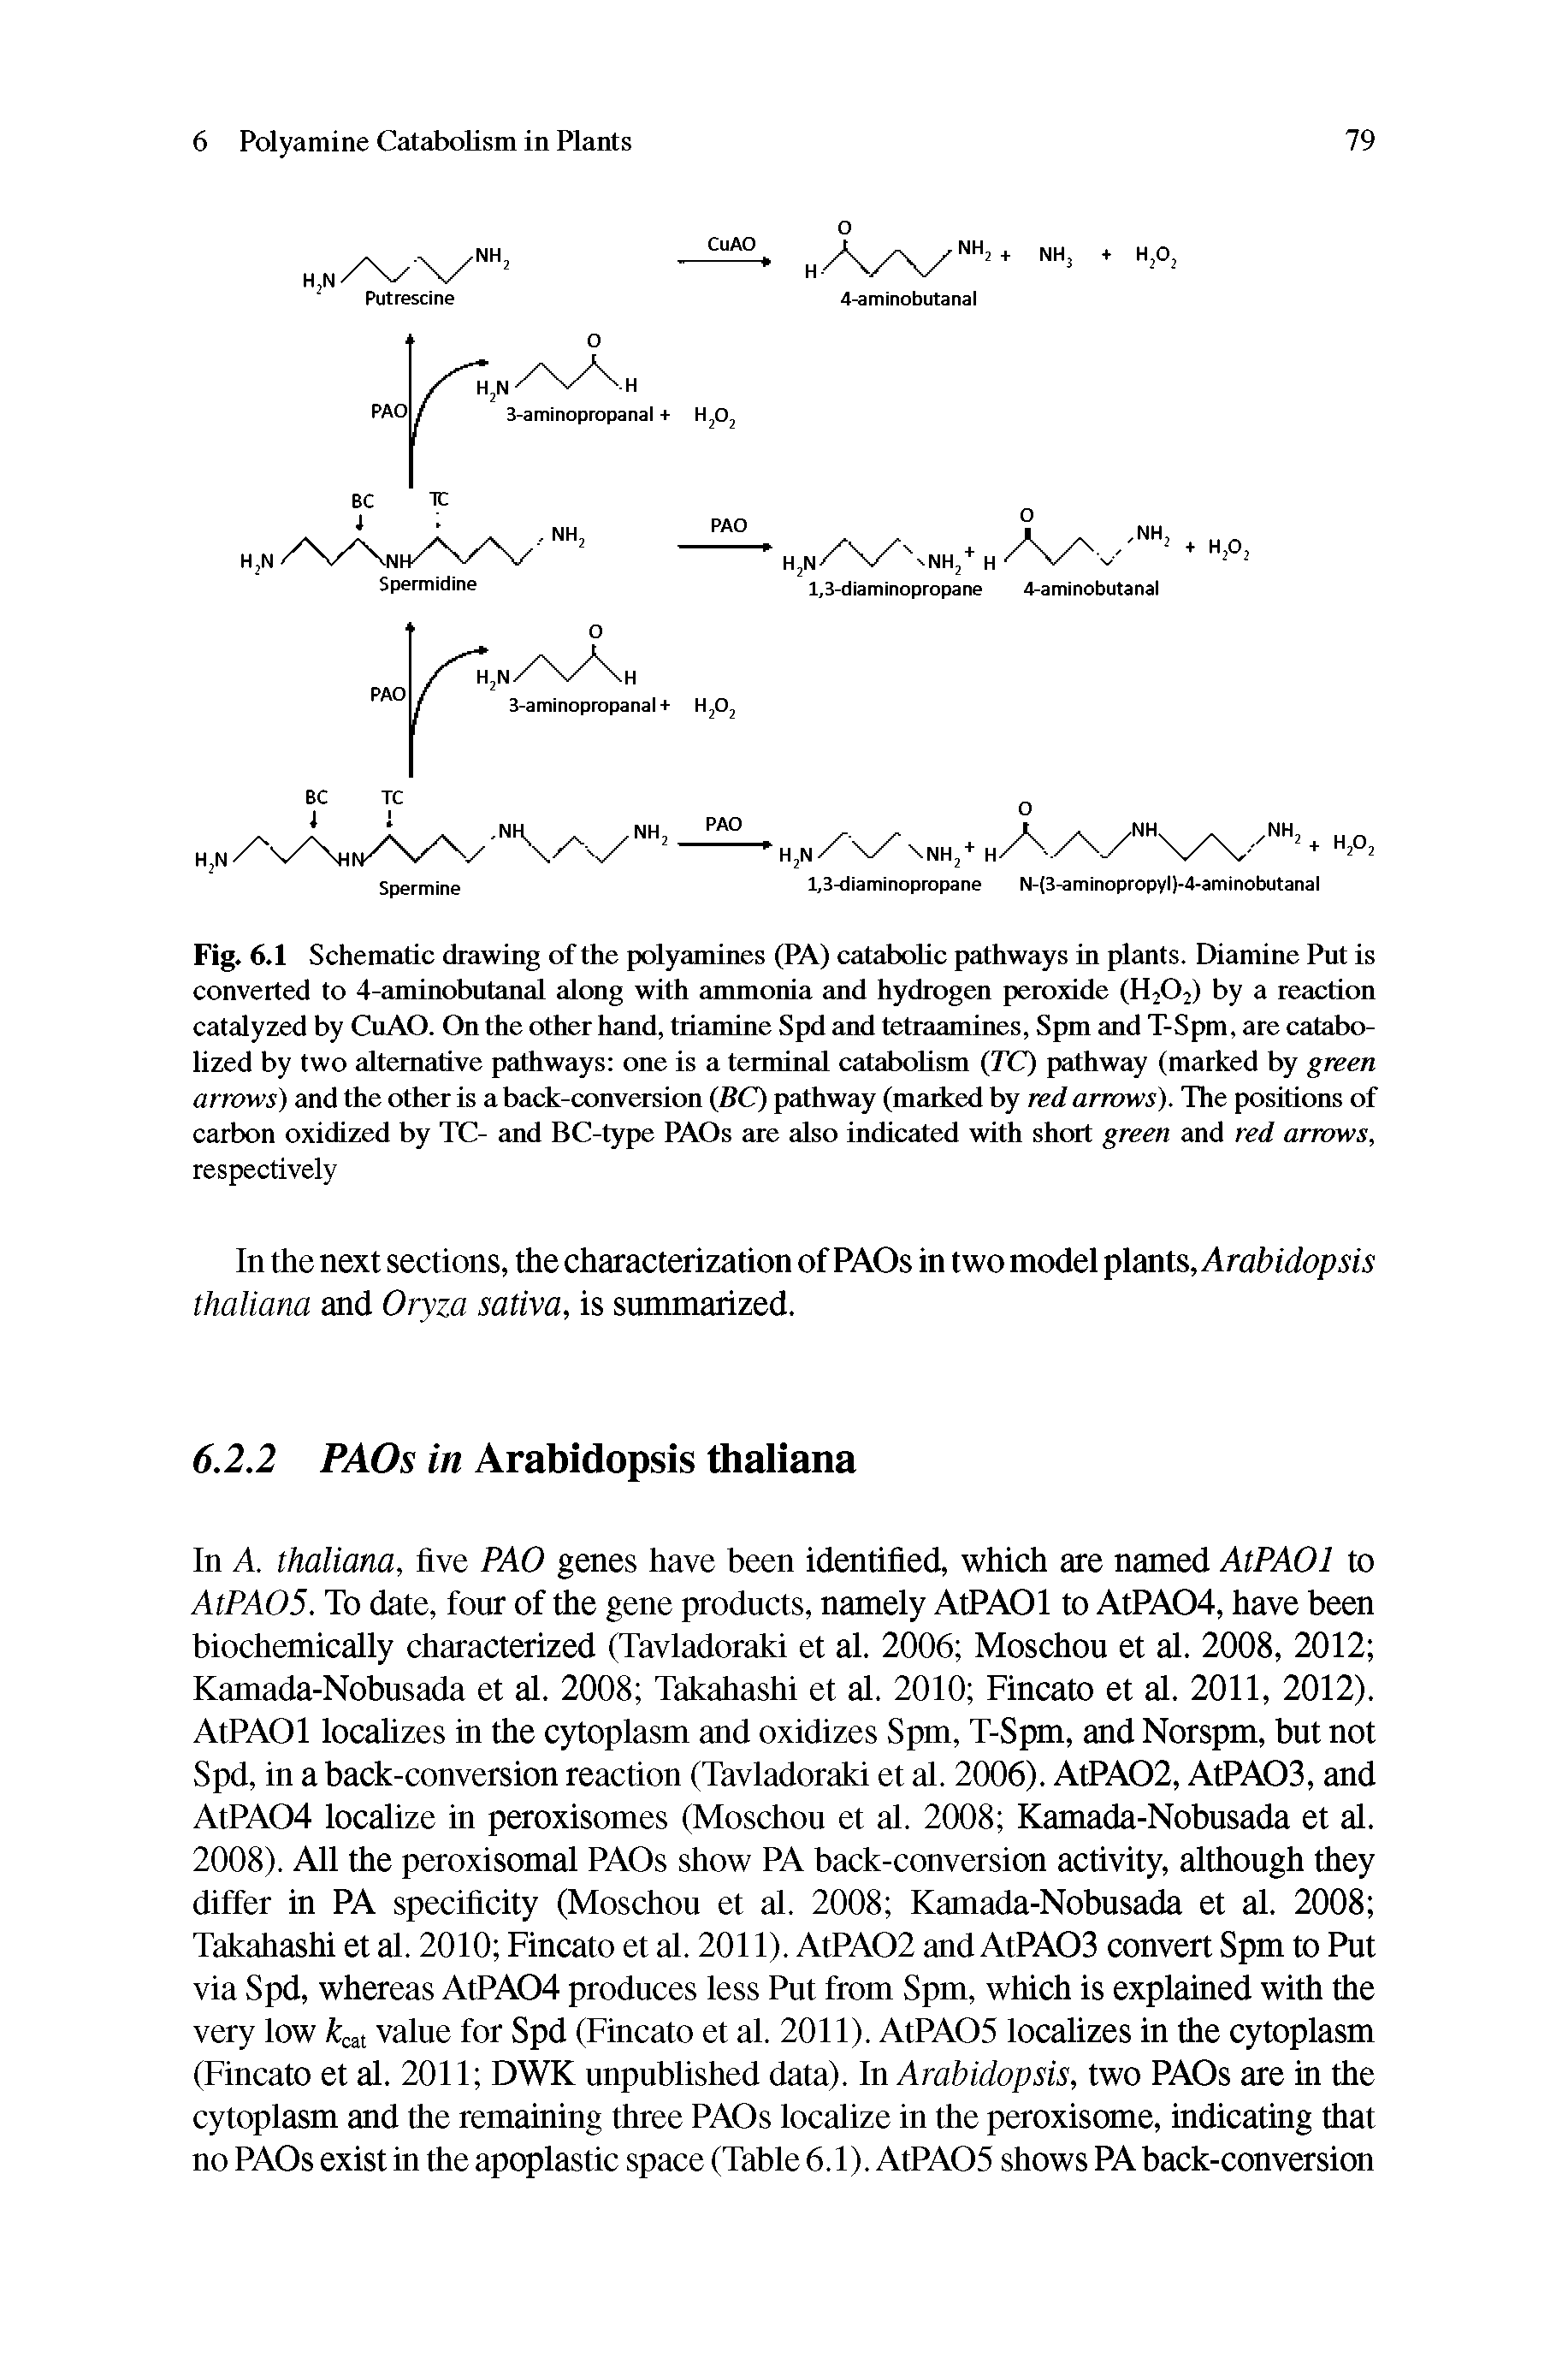 Fig. 6.1 Schematic drawing of the polyamines (PA) catabolic pathways in plants. Diamine Put is converted to 4-aminobutanal along with ammonia and hydrogen peroxide (H2O2) by a reaction catalyzed by CuAO. On the other hand, triamine Spd and tetraamines, Spm and T-Spm, are catabo-lized by two alternative pathways one is a terminal catabolism (TC) pathway (marked by green arrows) and the other is a back-conversion (BC) pathway (marked by red arrows). The positions of carbon oxidized by TC- and BC-type PAOs are also indicated with short green tmd red arrows, respectively...